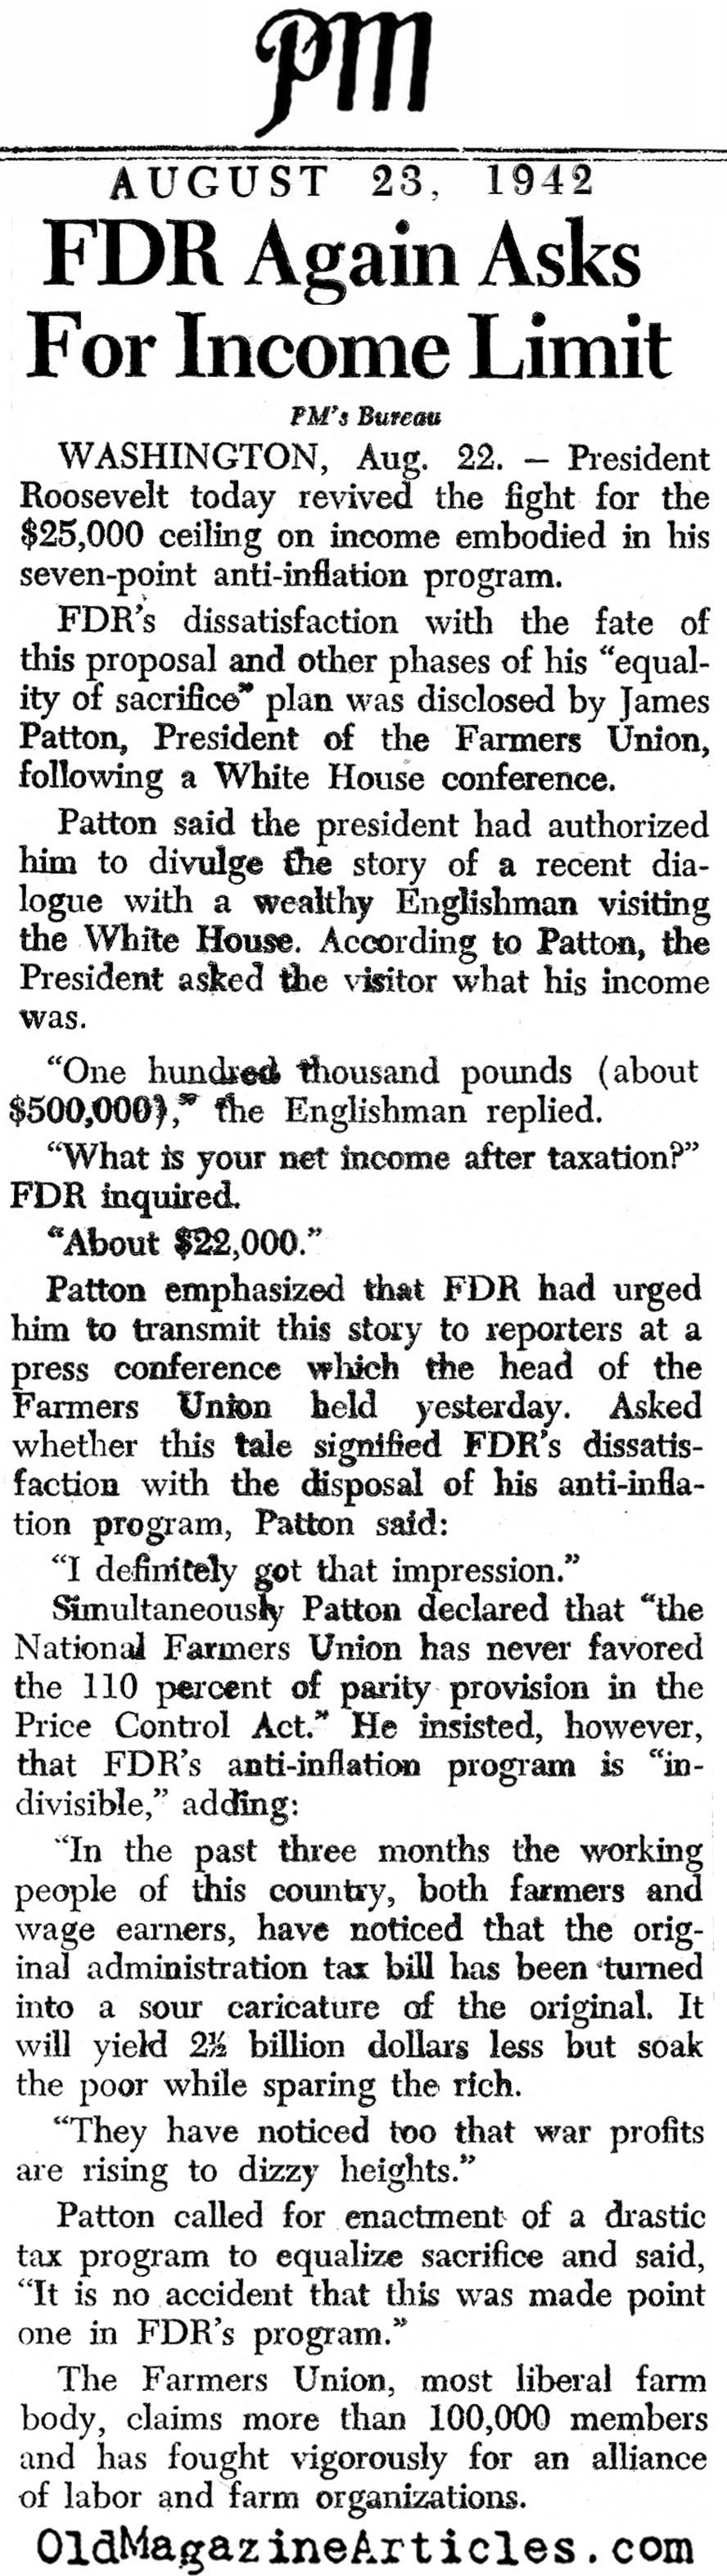 FDR's Proposal to Limit Personal Income (PM Tabloid, 1942)